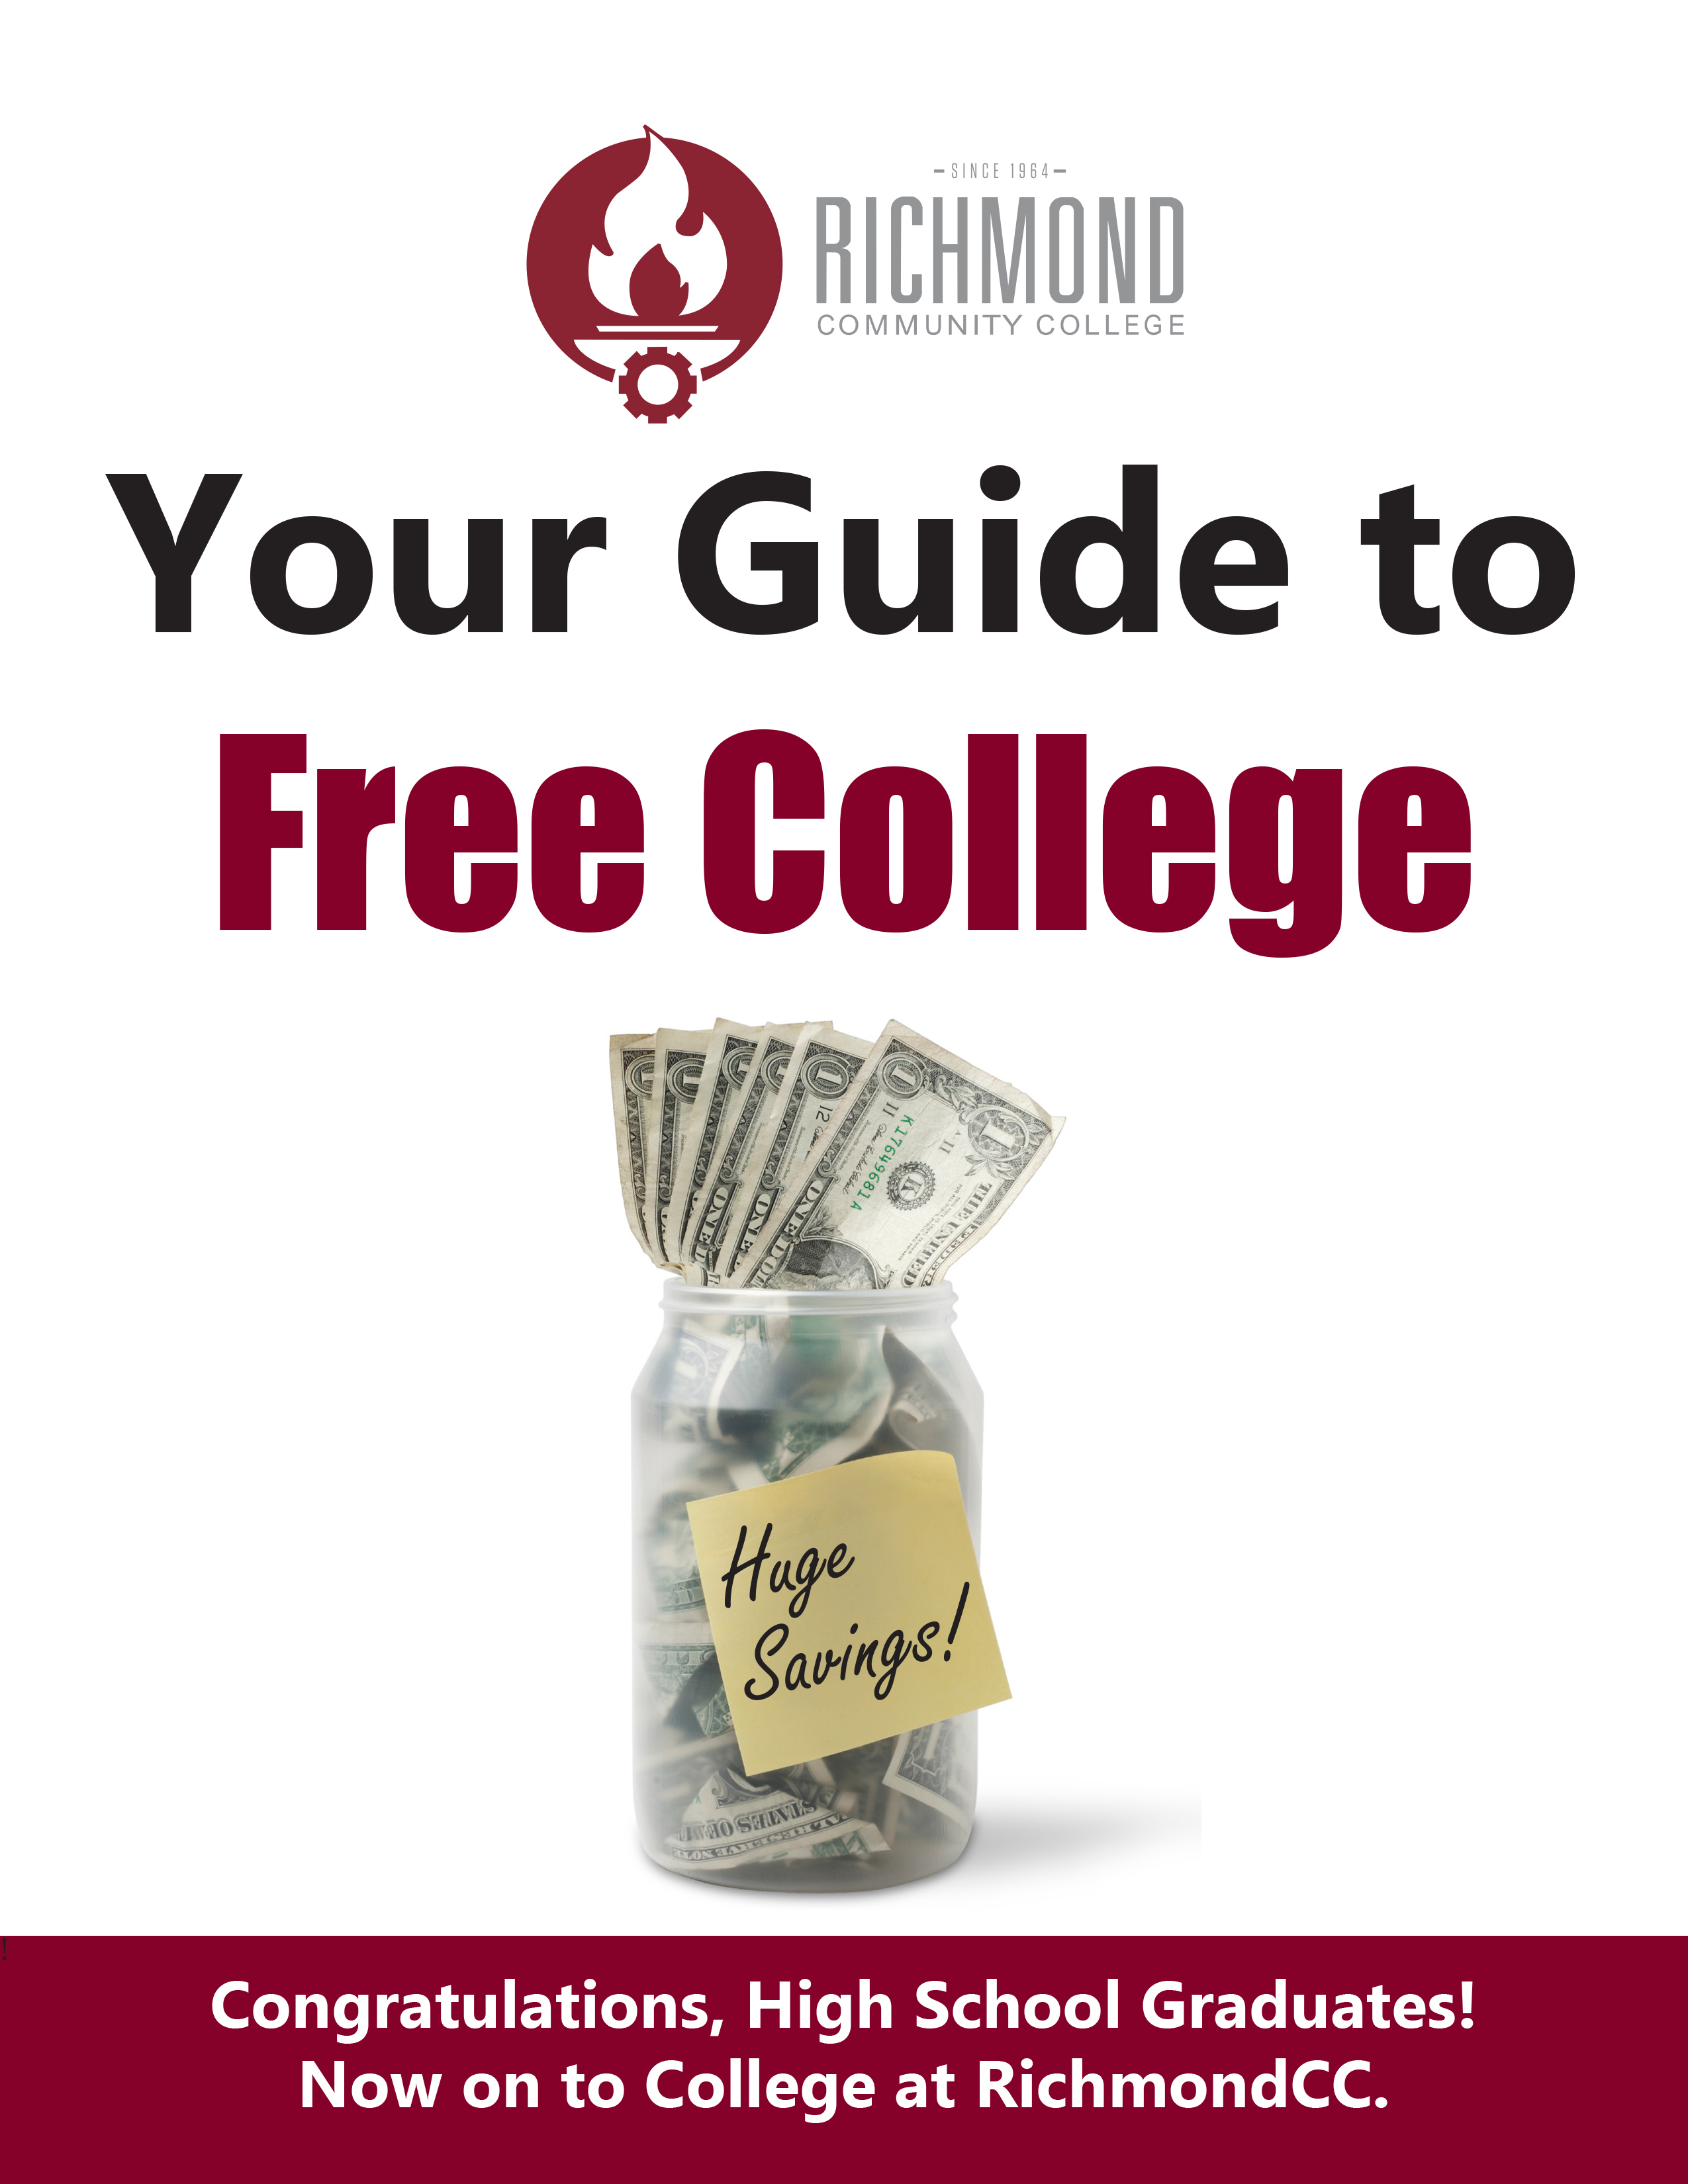 Your guide to free college booklet cover